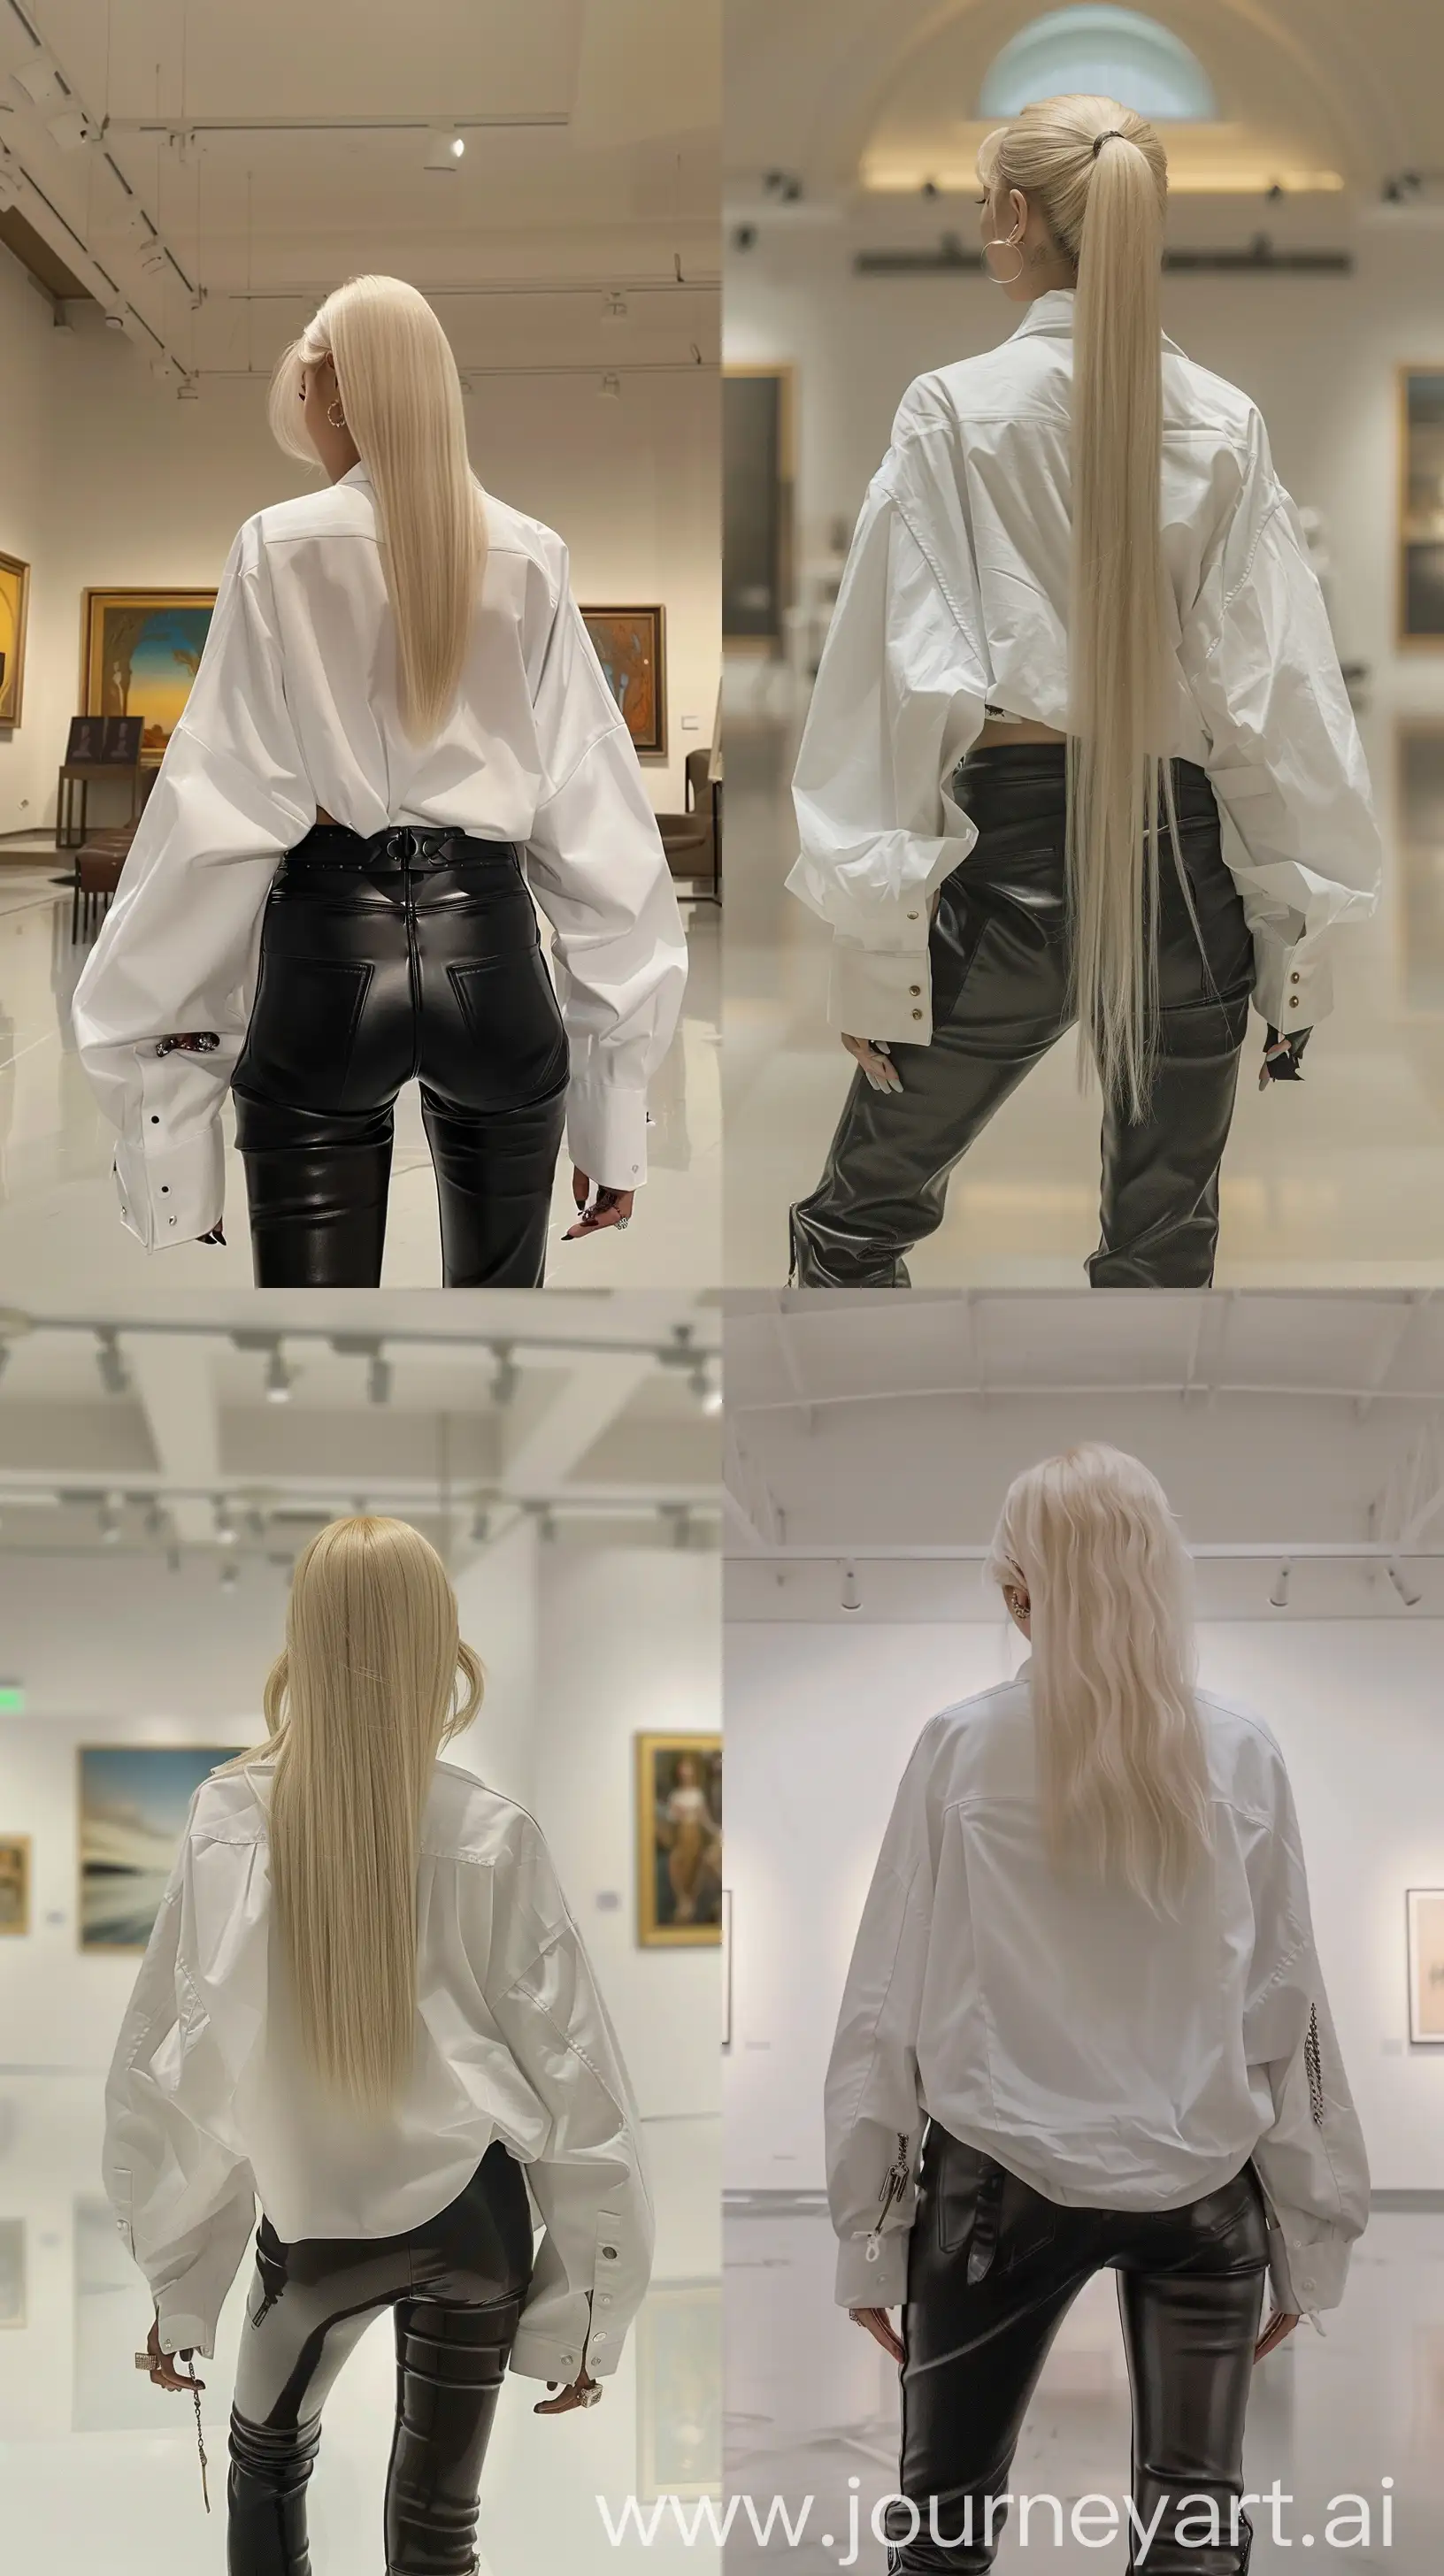 Blonde-Wolfcut-Jennie-in-Oversized-Shirt-at-Art-Gallery